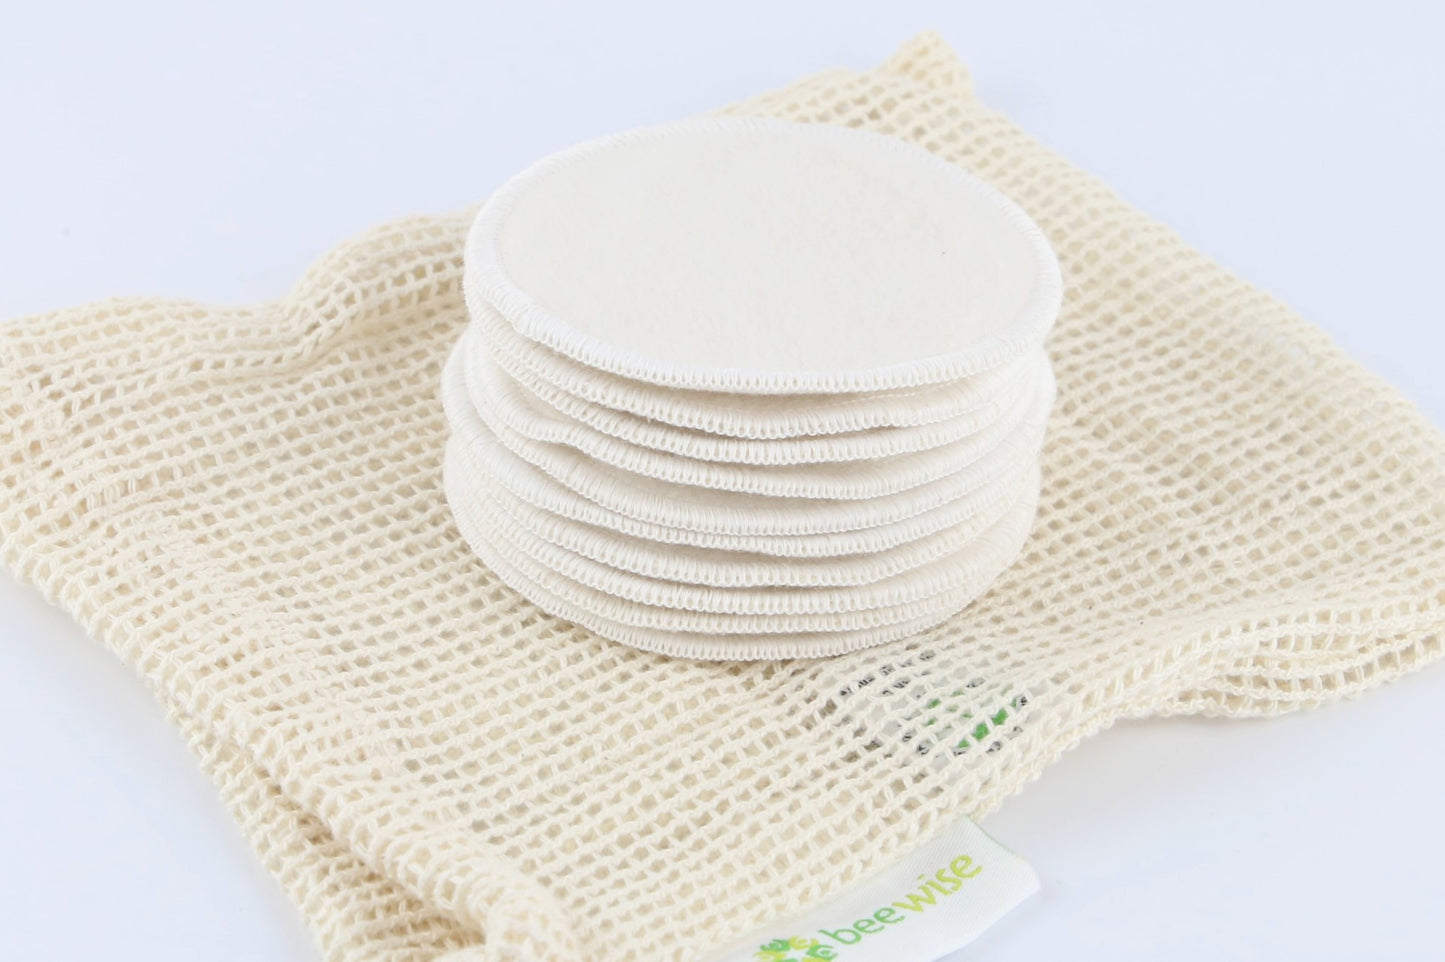 Reusable Makeup Remover Pads showing on top of the mesh bag